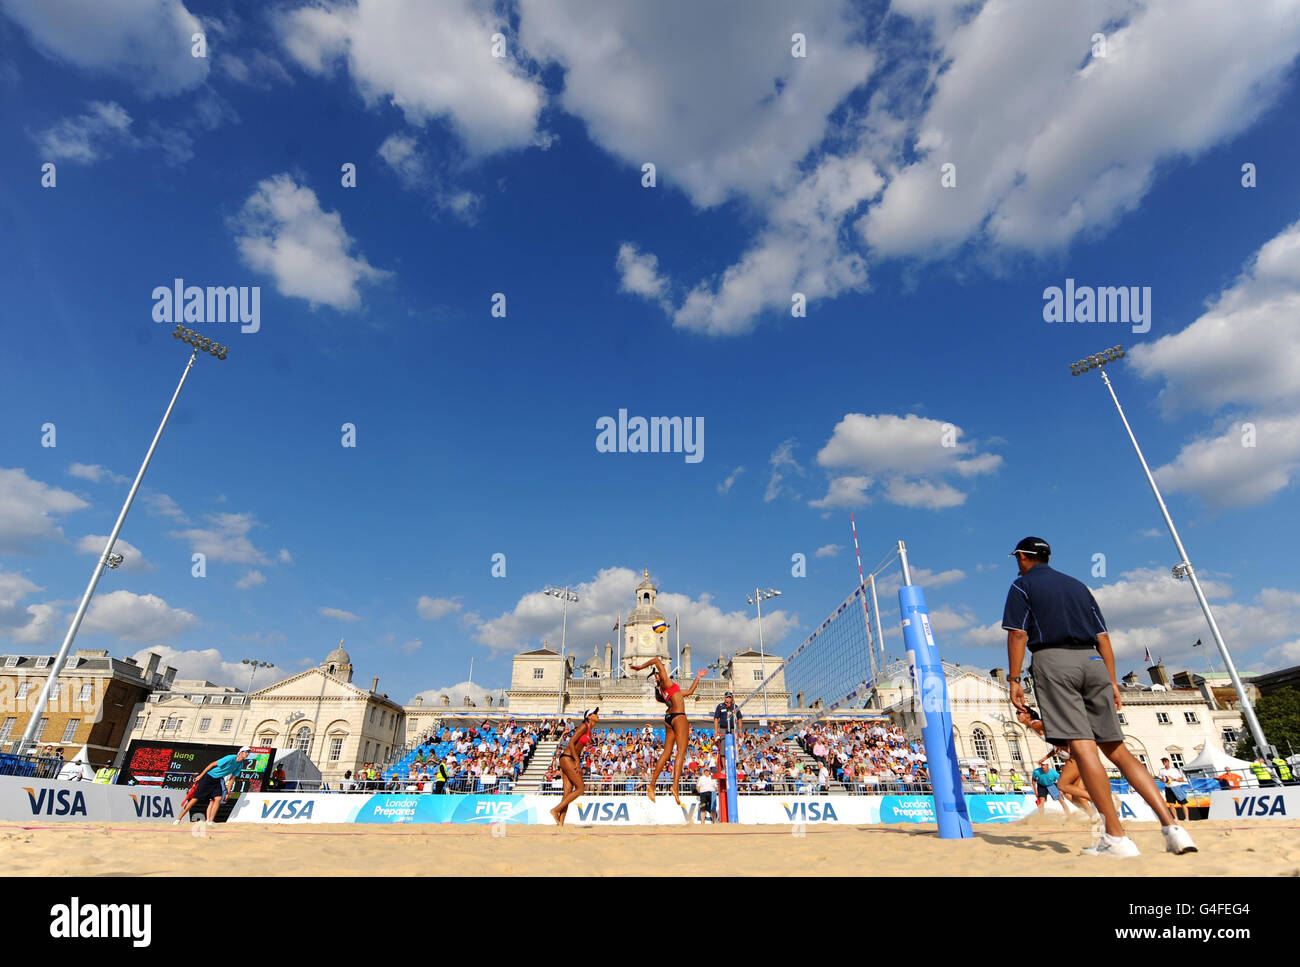 General view of the arena during the the preliminary phase match between China's Fan Wang and Yuanyuan Ma and Puerto Rico's Yarleen Santiago and Dariam Acevedo during the FIVB Beach Volleyball International at Horse Guards Parade, London. Stock Photo